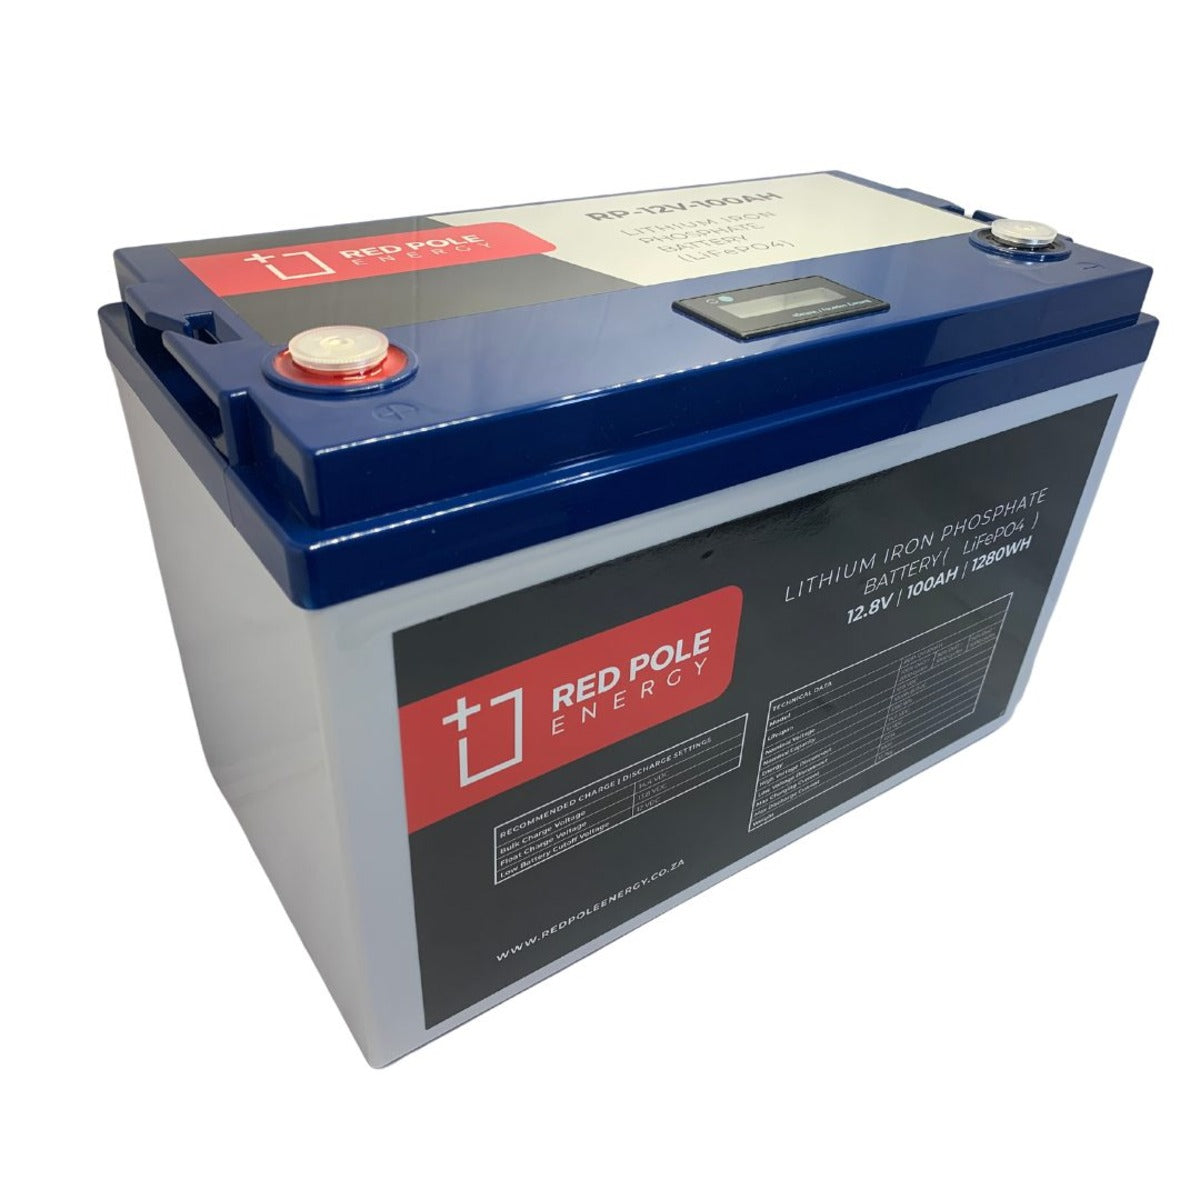 Red Pole Energy 12V 100Ah 1280Wh LiFePO4 Battery